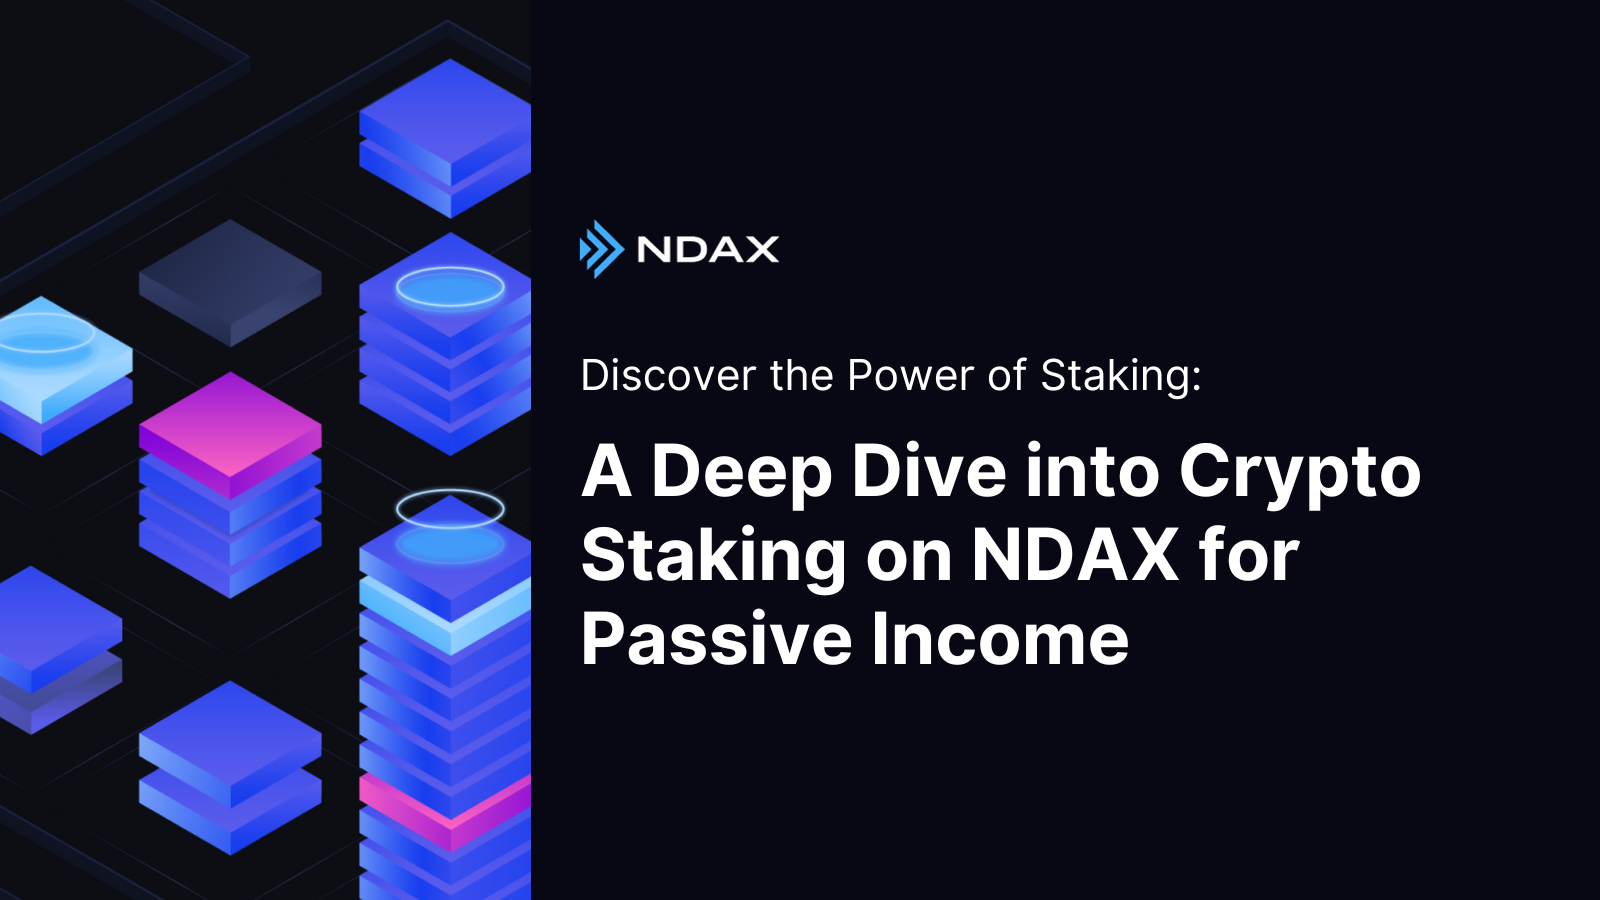 Discovering the Power of Staking: A Deep Dive into Crypto Staking on NDAX for Passive Income